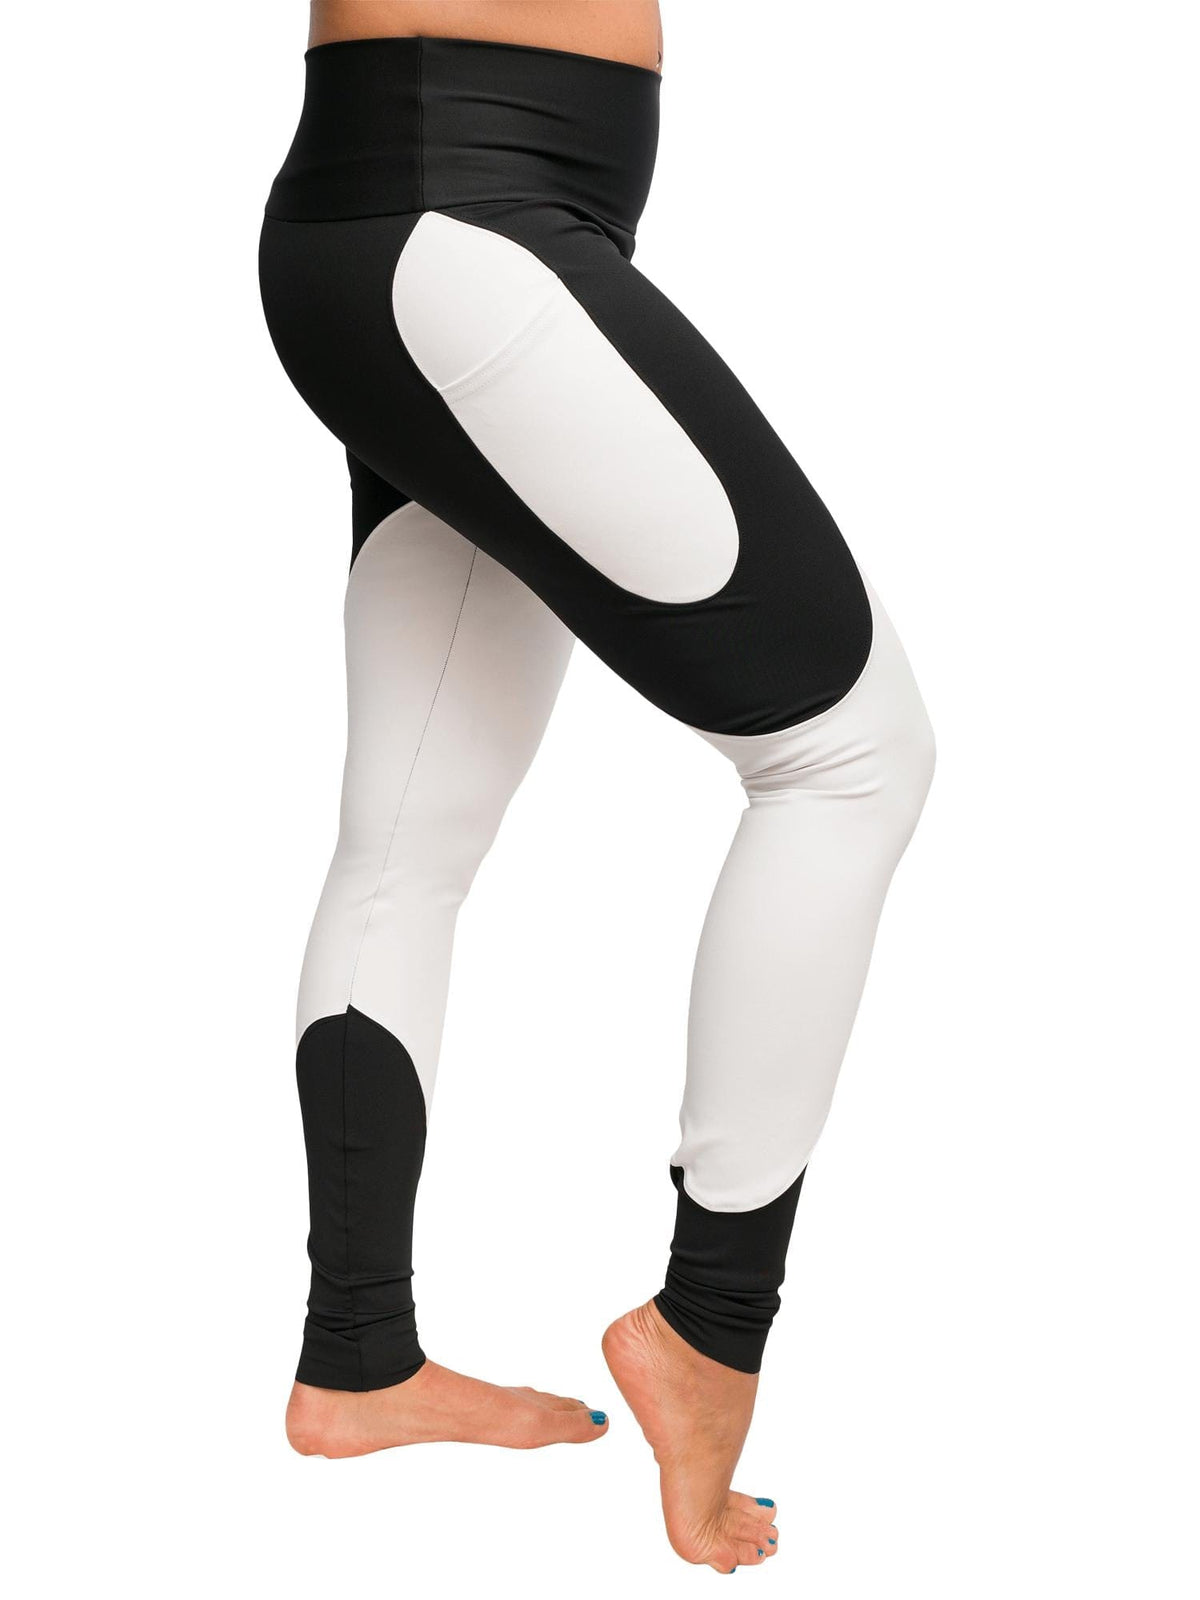 Model: Ana is an avid scuba diver, as well as mooring buoy volunteer for Biscayne National Park. She is 5&#39;9&quot;, 170 lbs, and is wearing a L legging.